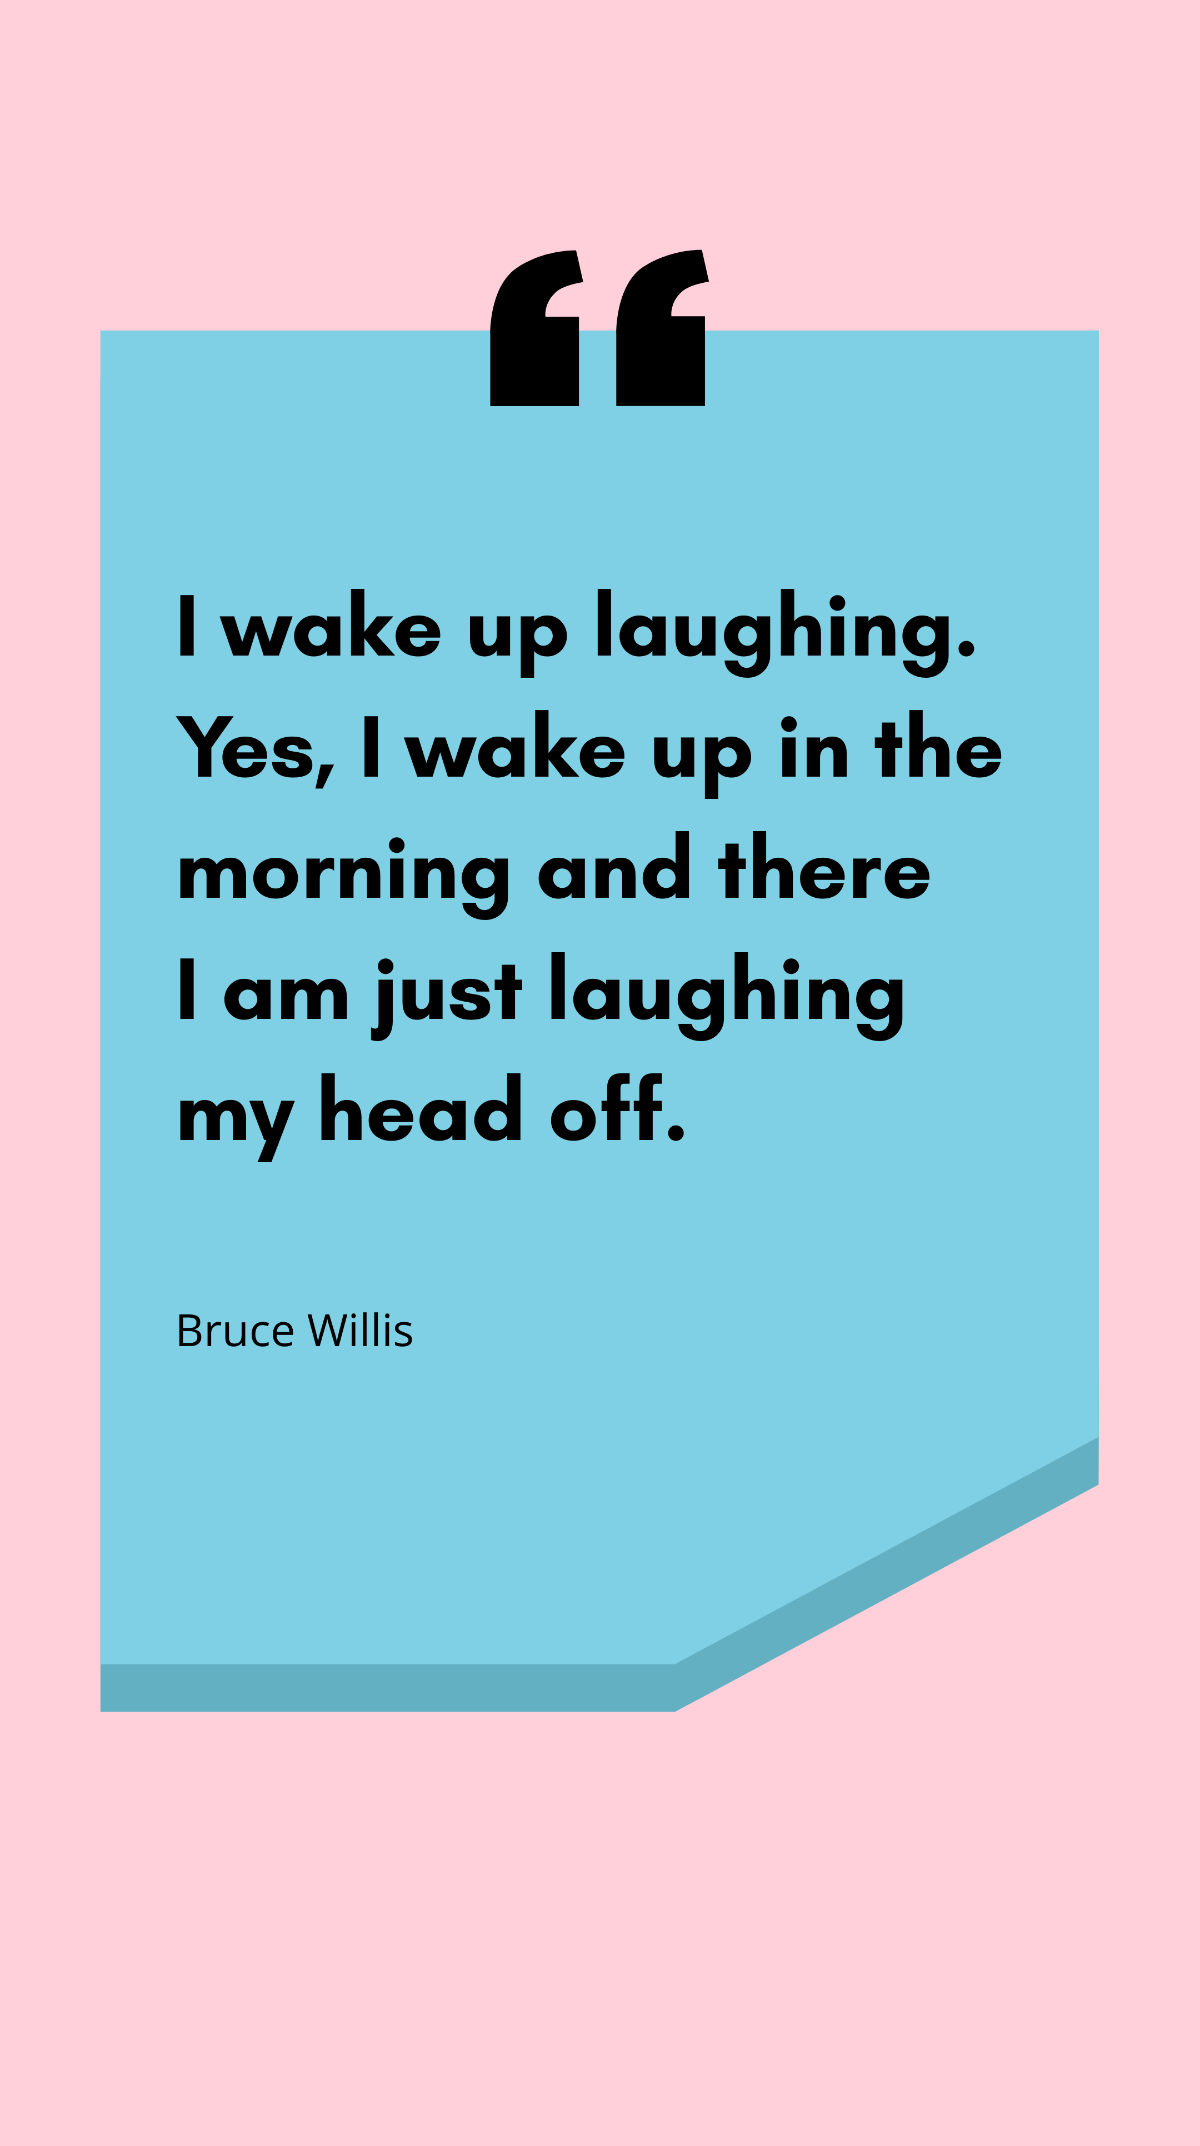 Bruce Willis - I wake up laughing. Yes, I wake up in the morning and there I am just laughing my head off. Template